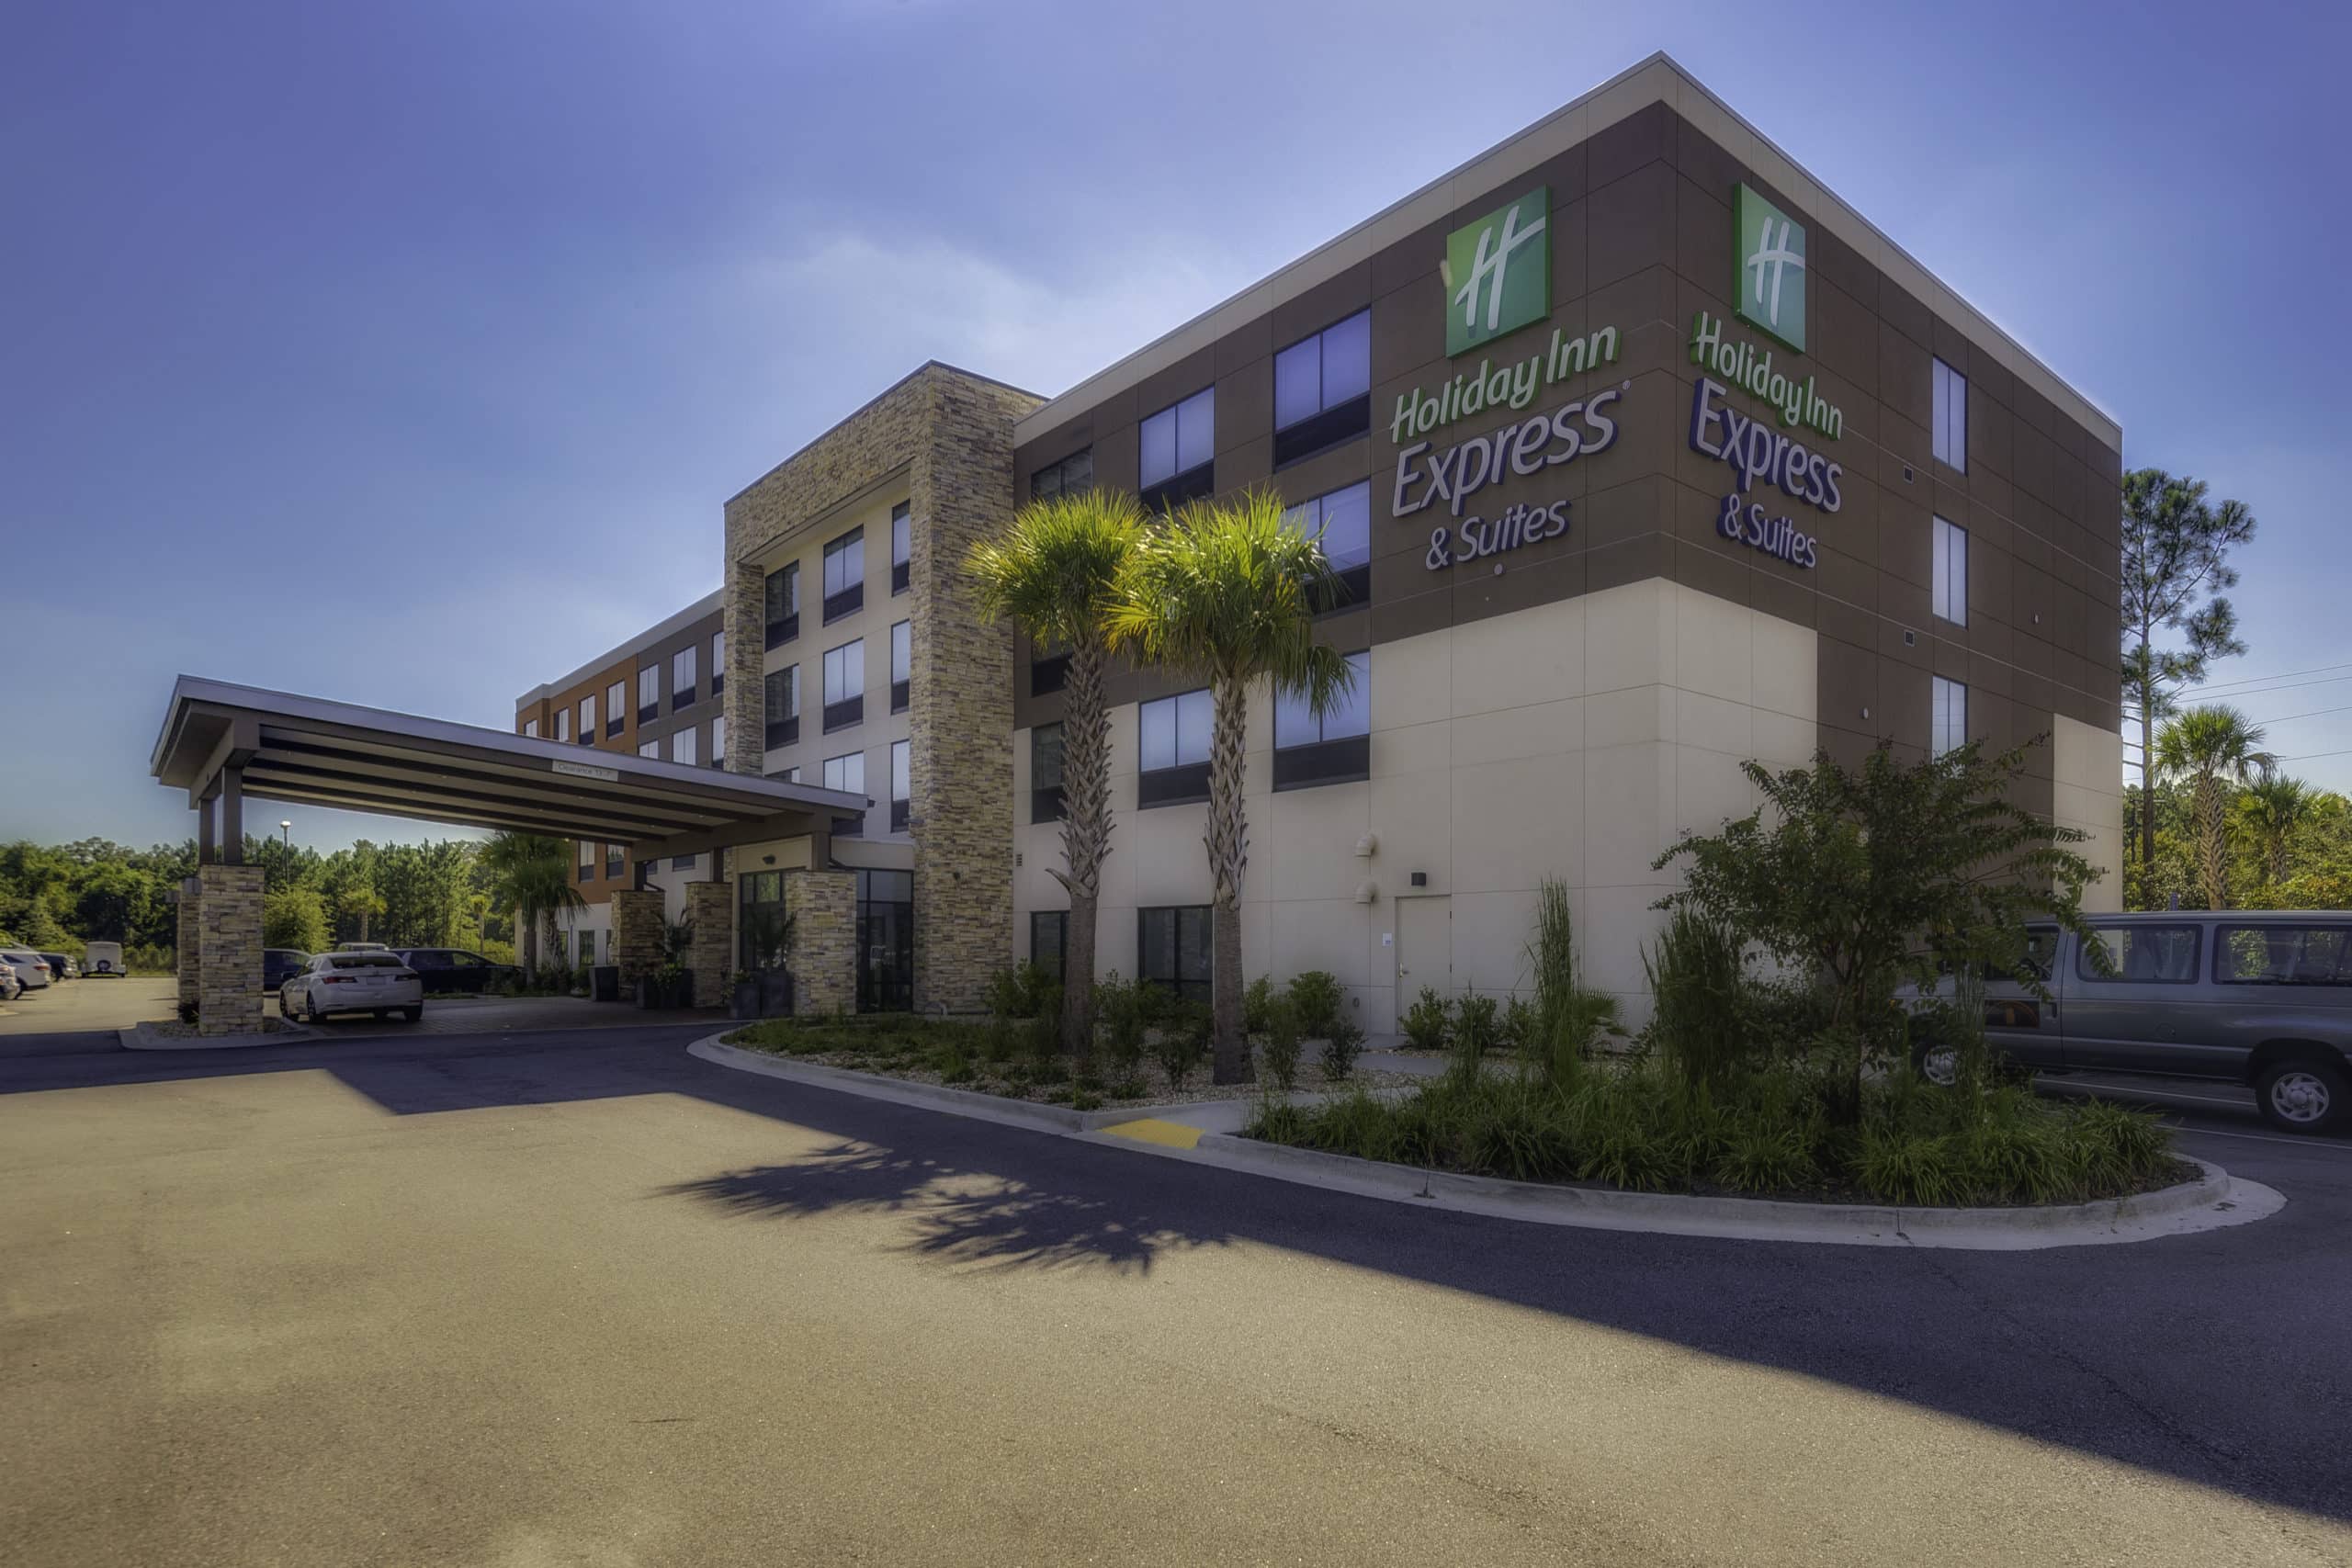 Holliday Inn Express & Suites